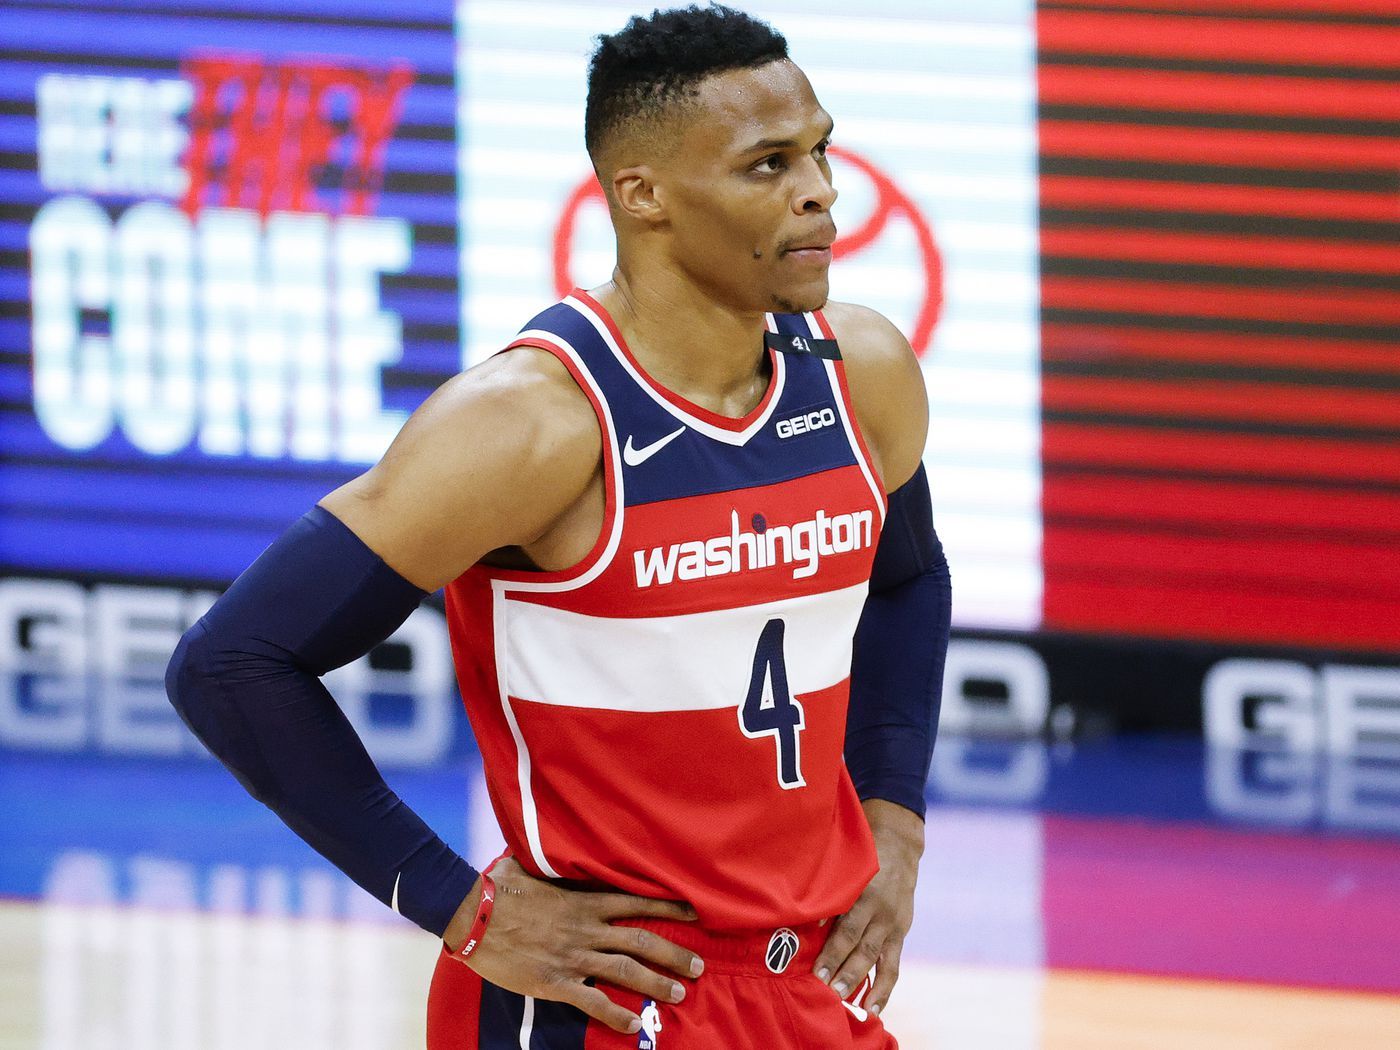 Russell Westbrook injury update: Wizards PG expected to miss one week due to quad injury